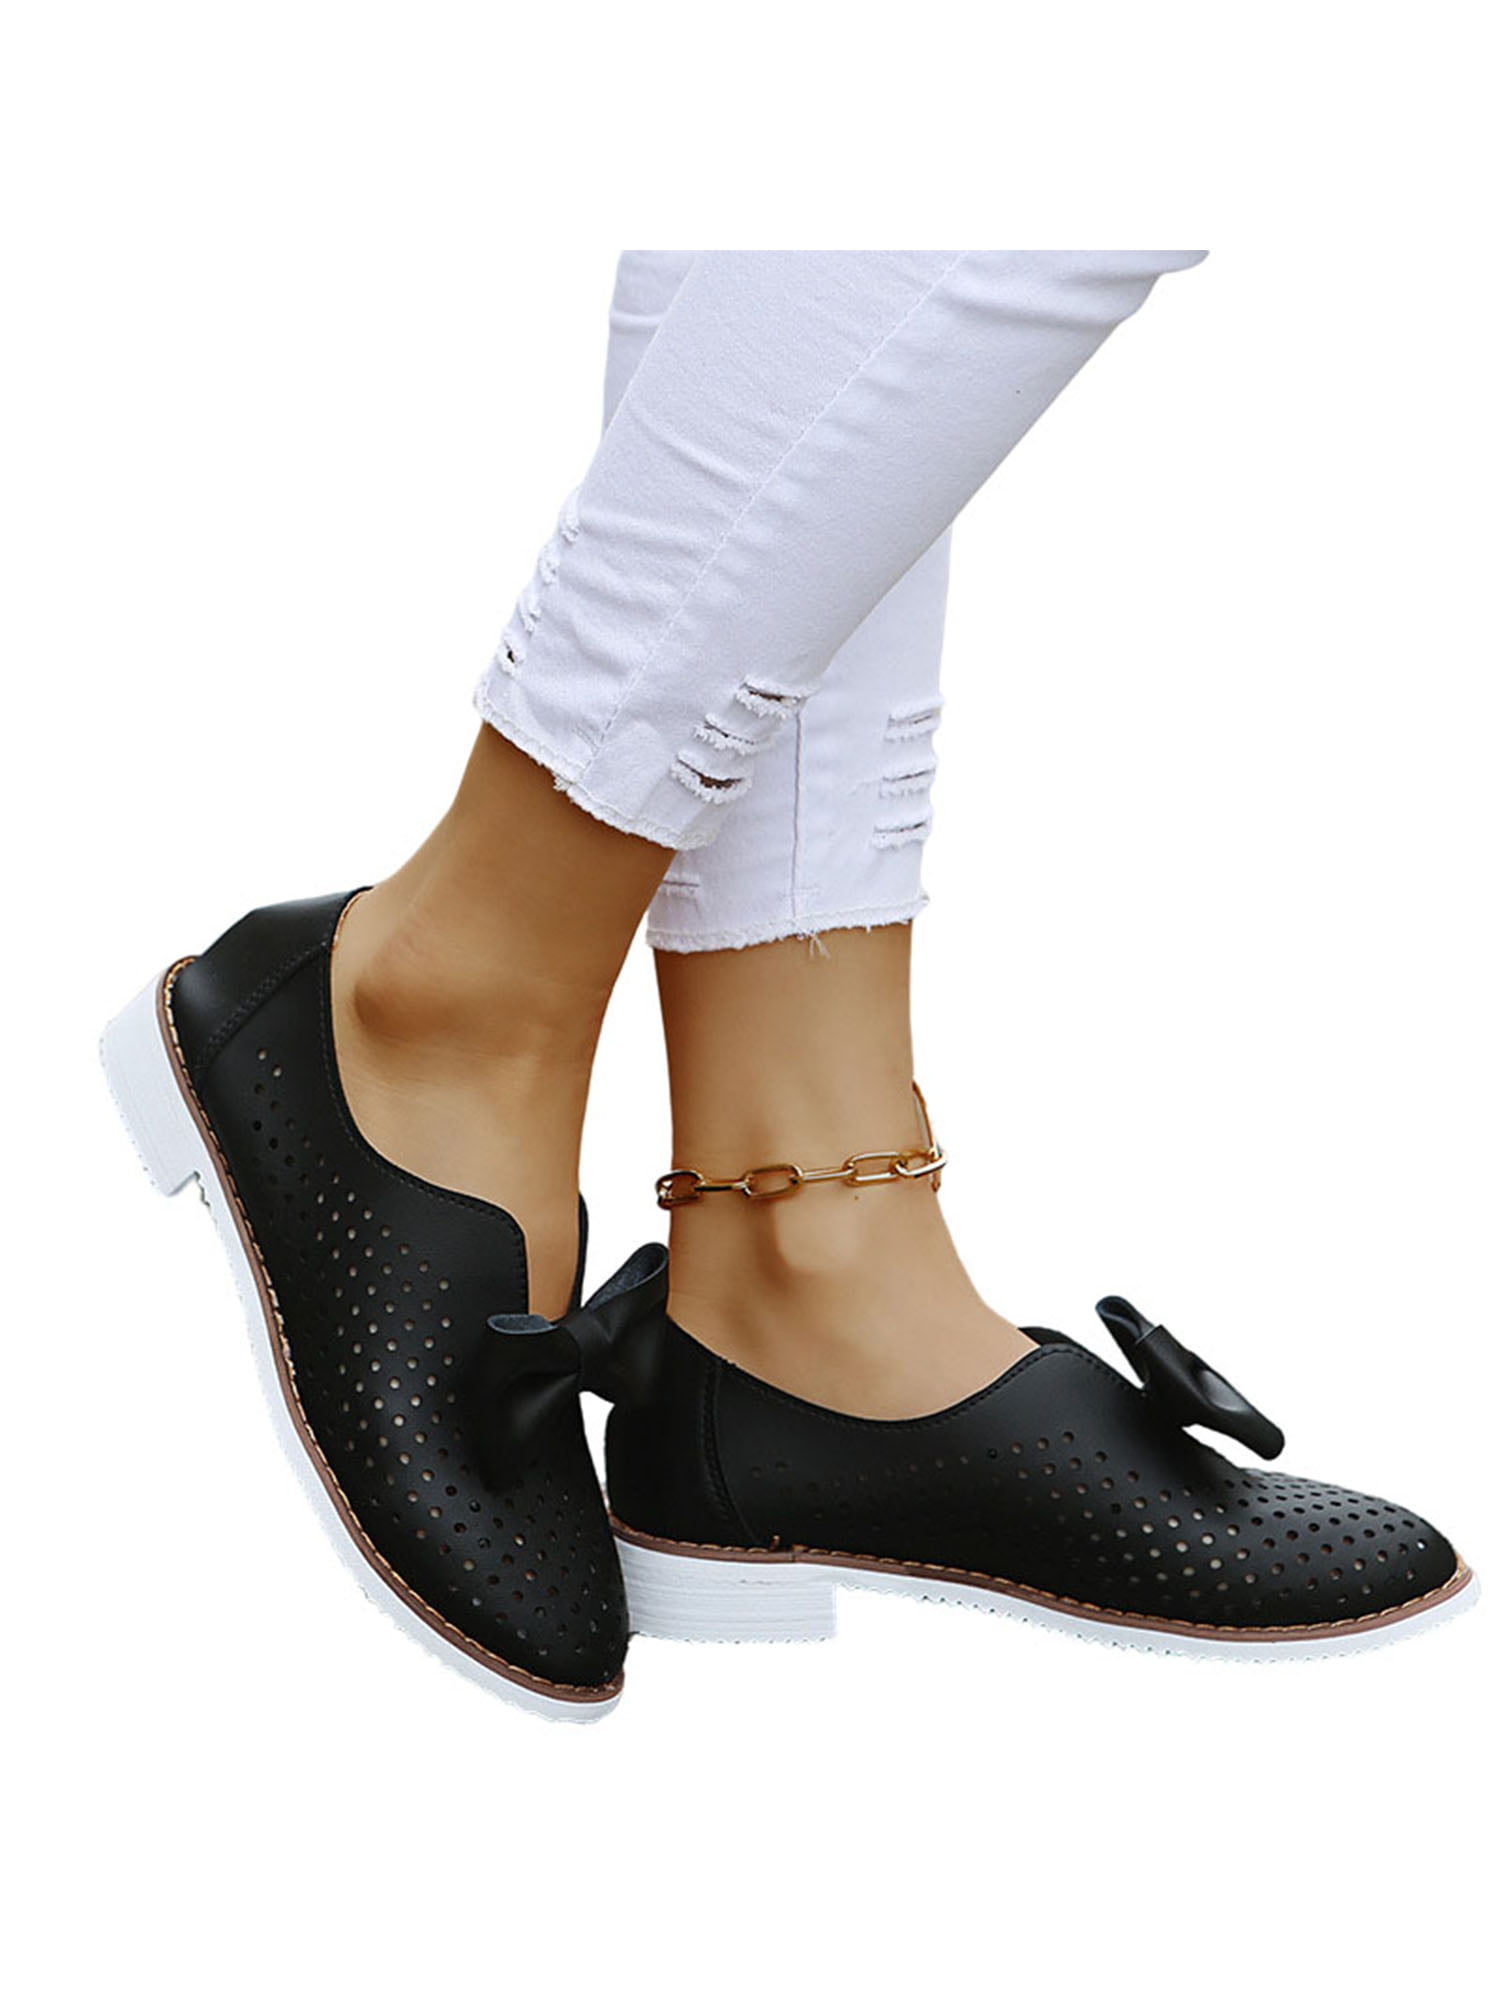 Womens Ladies Flat Slip On Loafers Casual Office Pumps Black School Shoes Size